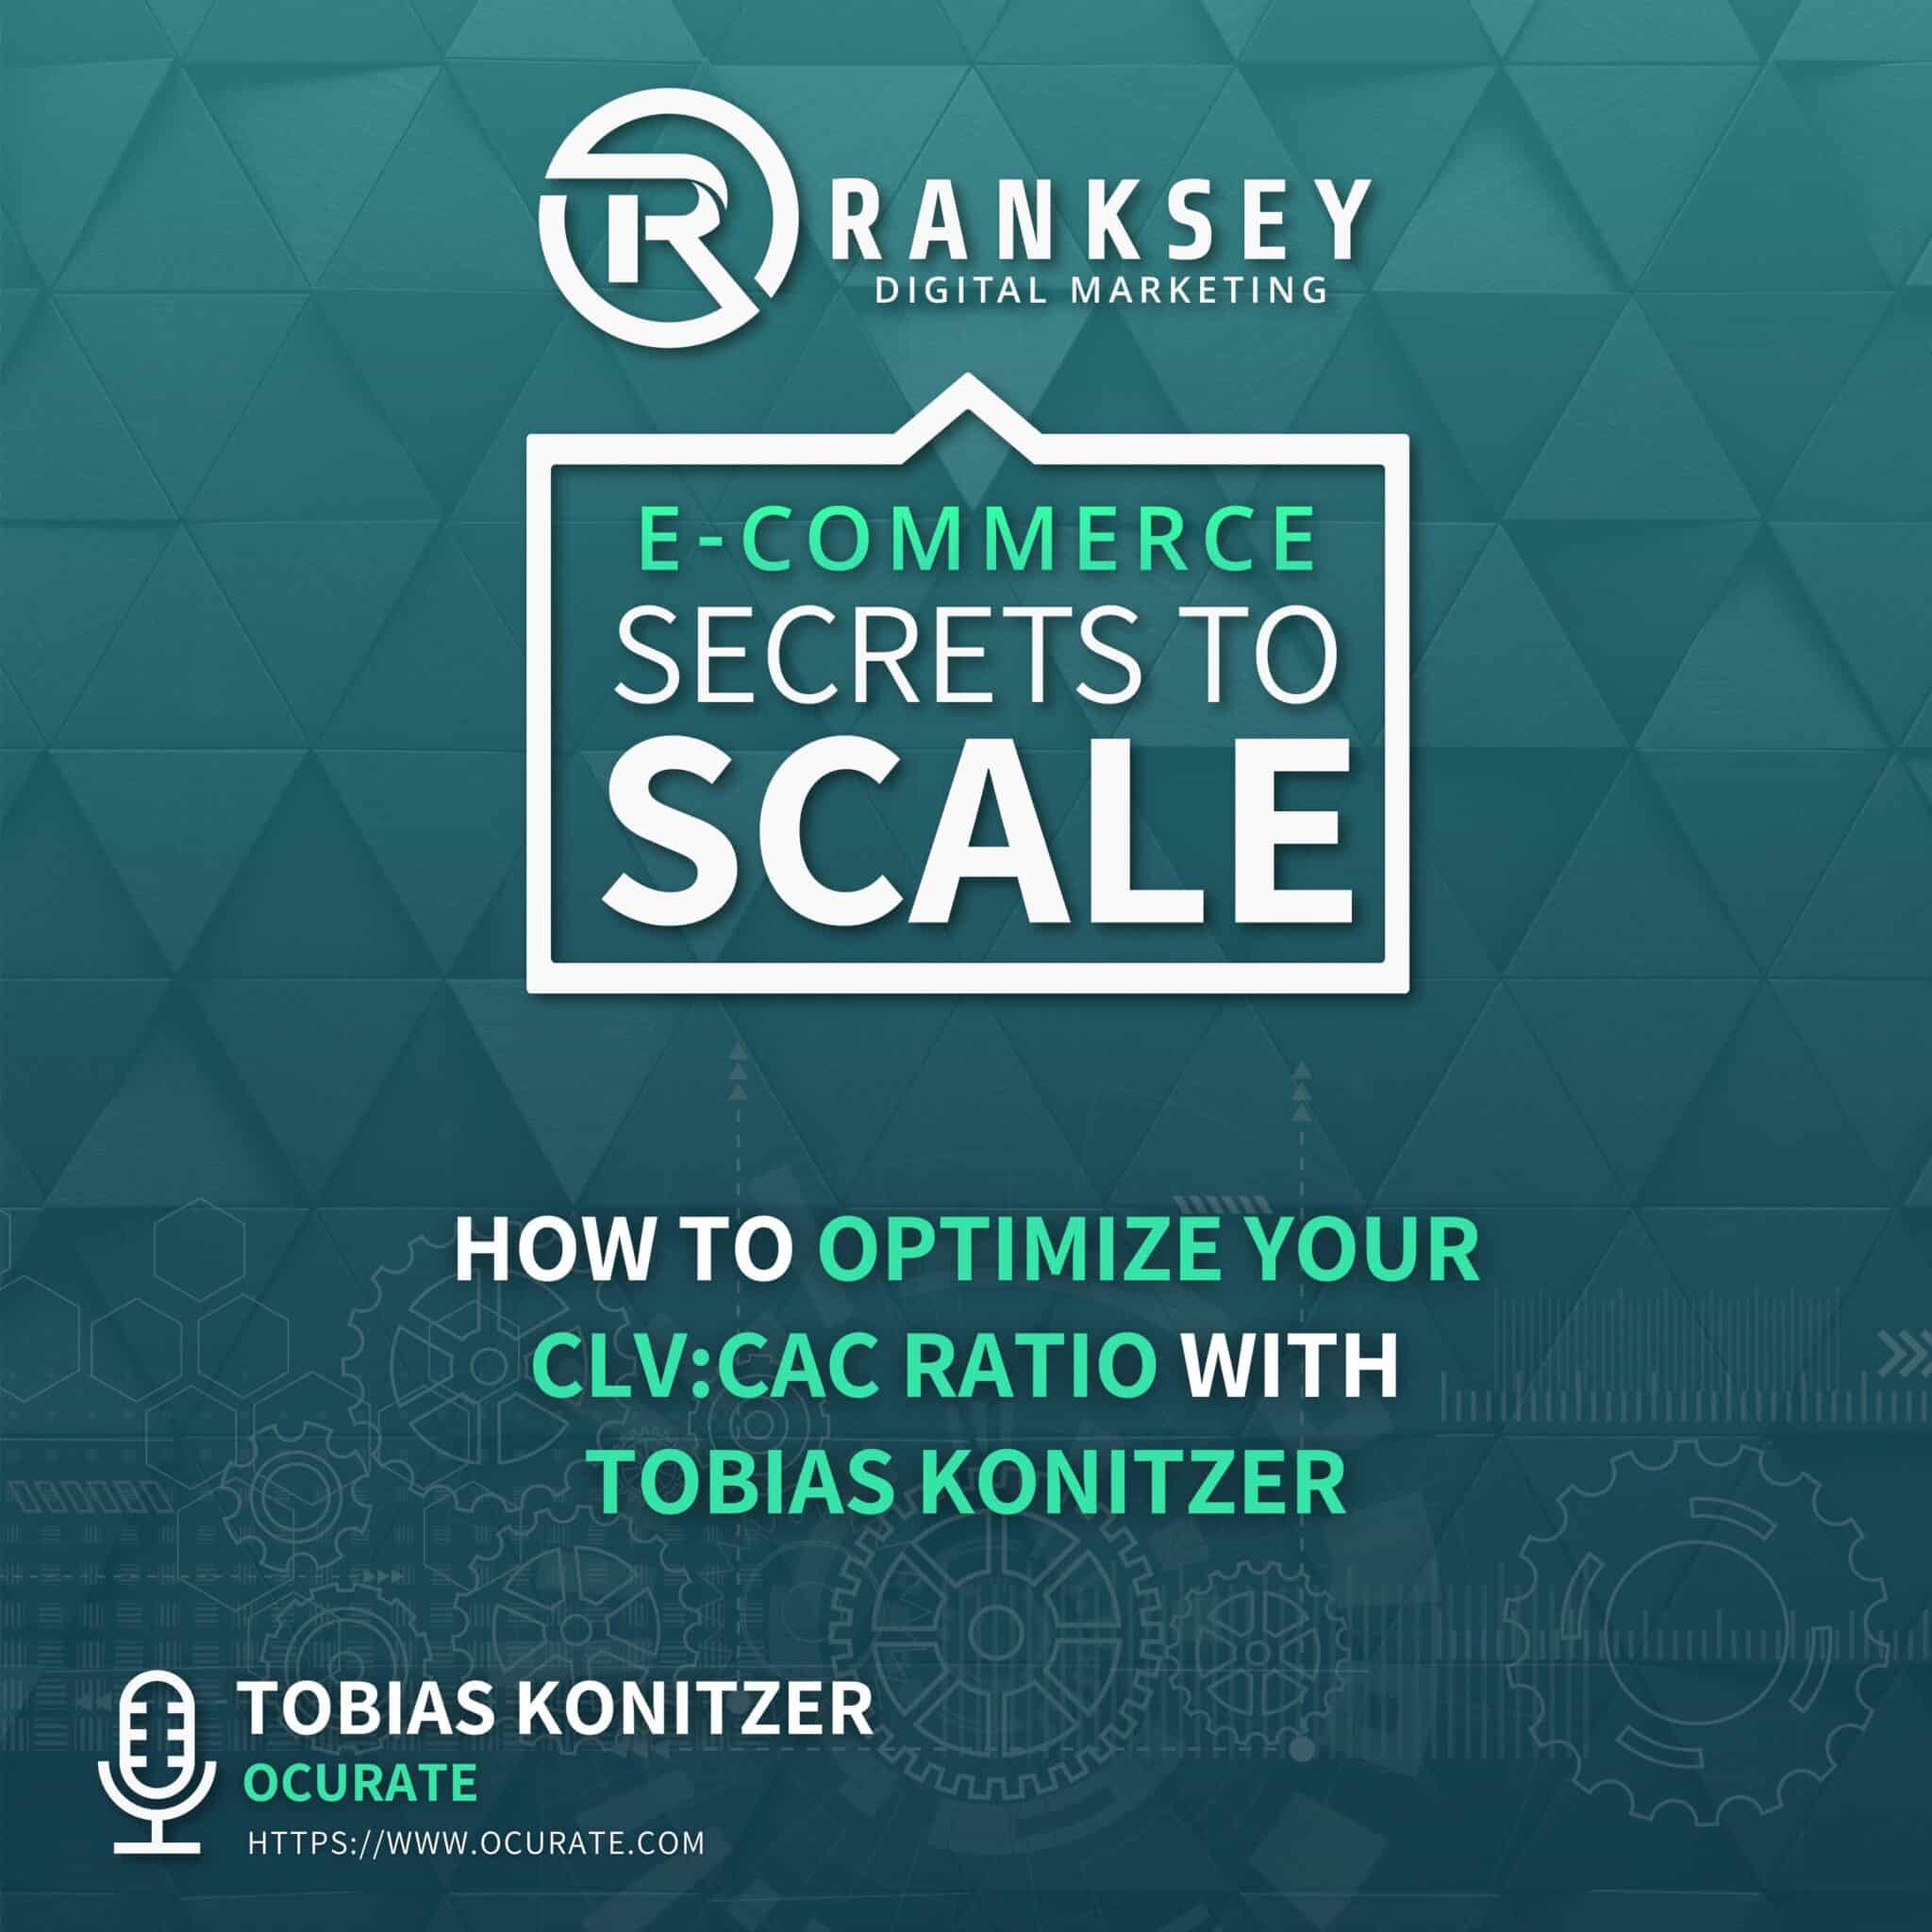 136 - How To Optimize Your CLVCAC Ratio With Tobias Konitzer